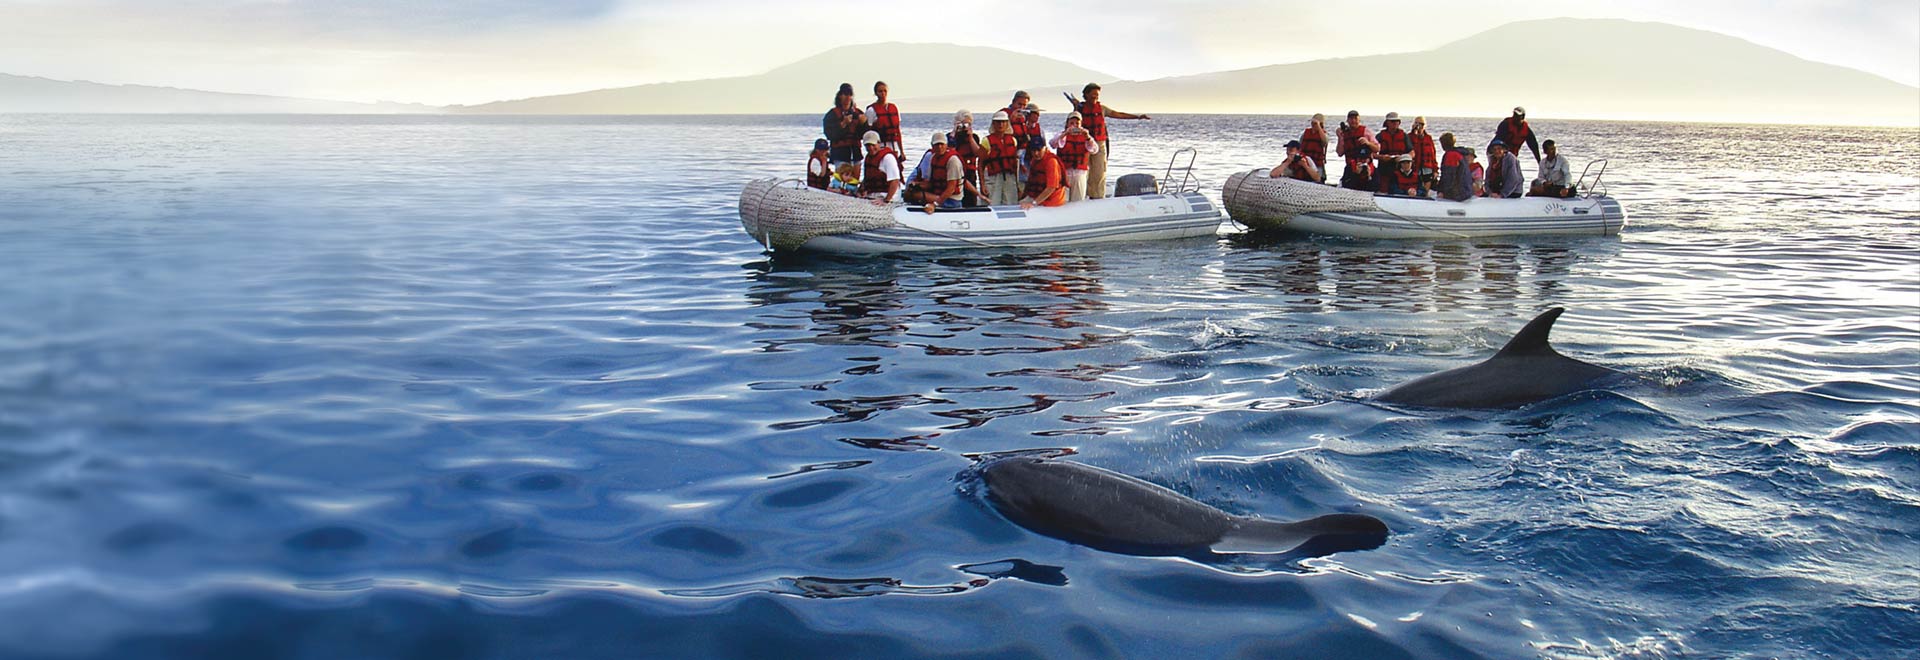 Americas Family Galapagos Whale Watching MH